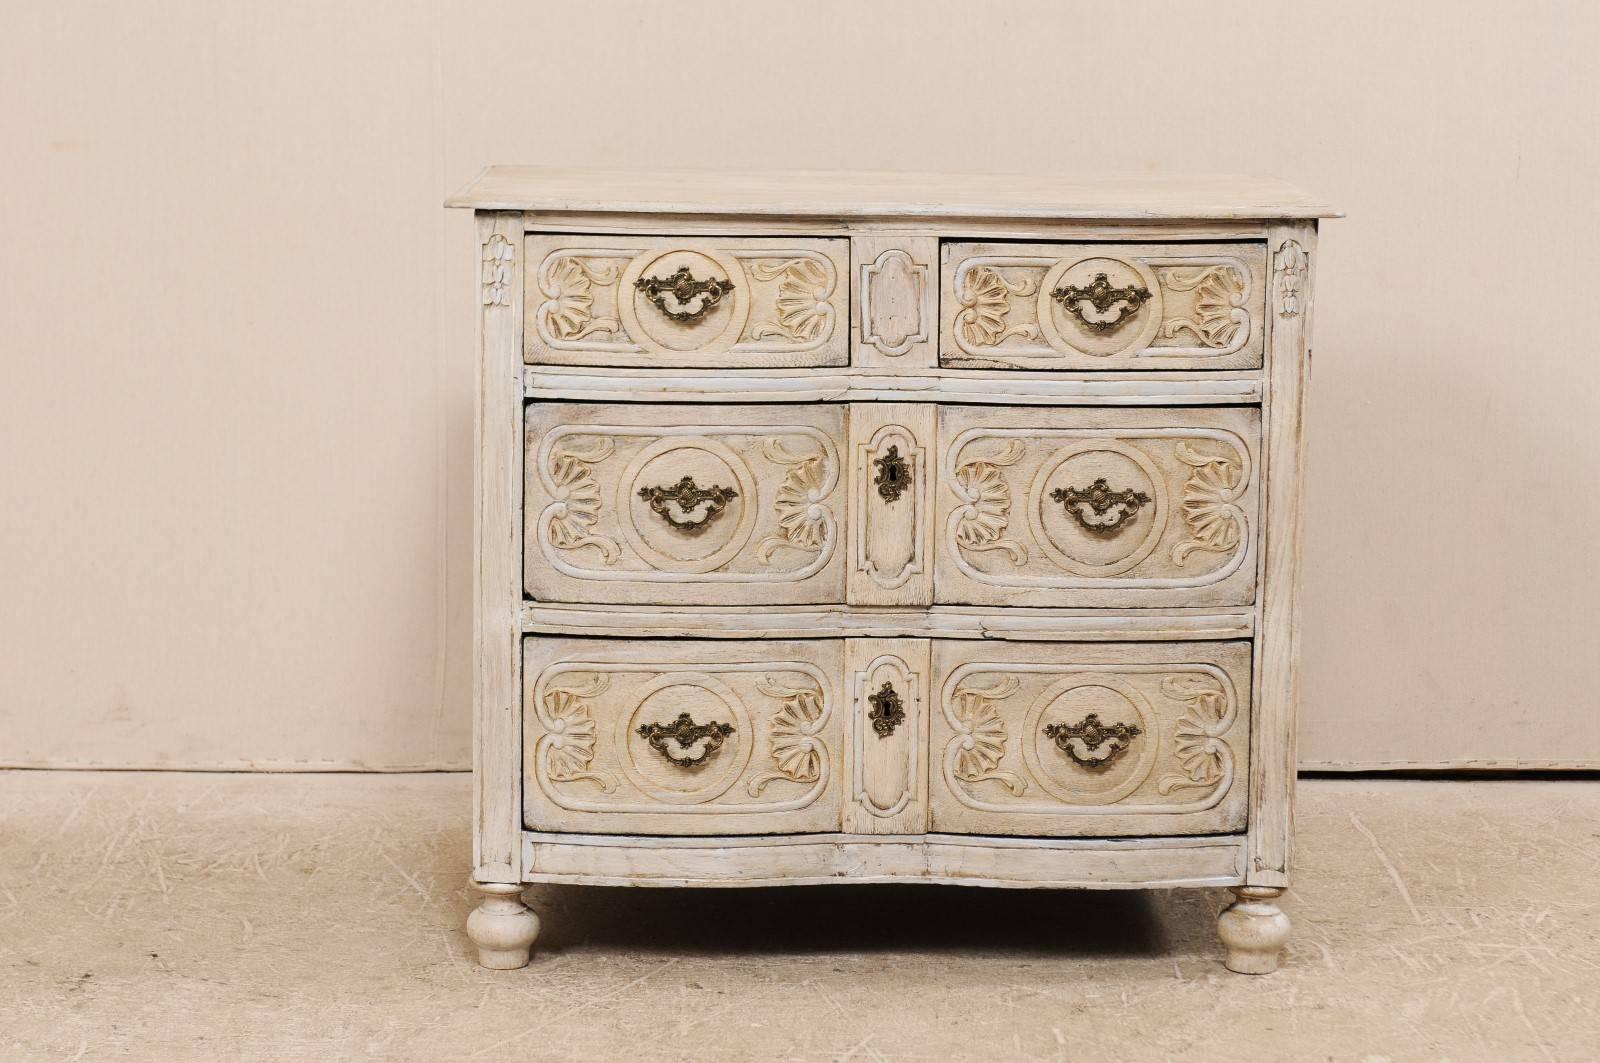 A French early 19th century scalloped front chest. This French chest from the 1820s has two small drawers over two larger drawers. Each drawer is elaborately carved with curved acanthus leaf, shell and framed carvings about the Rococo style